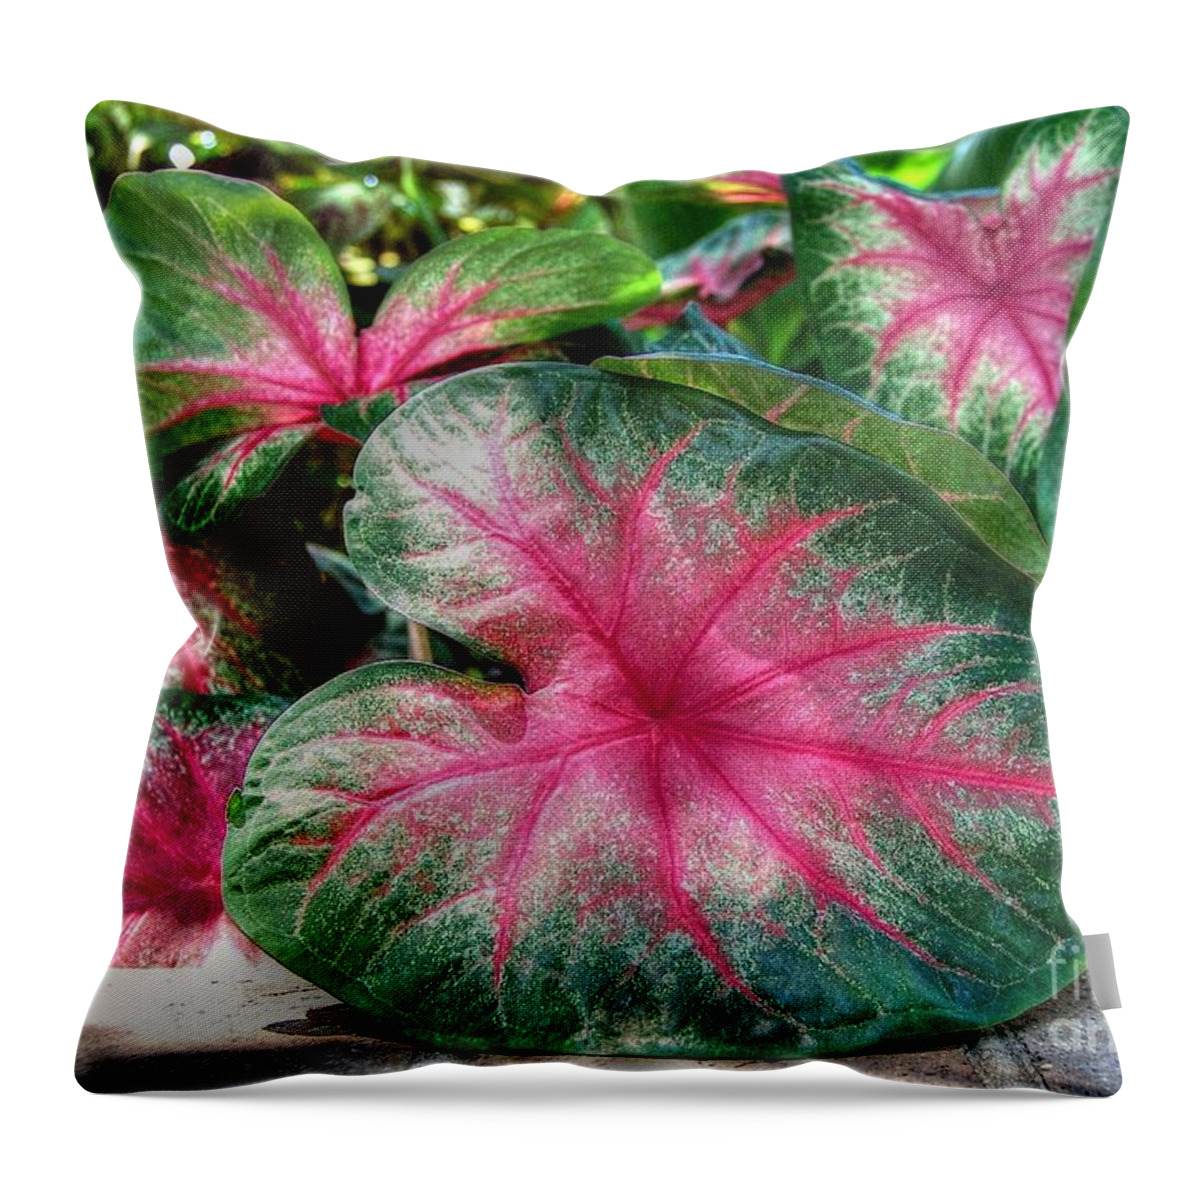 Flowers Throw Pillow featuring the photograph Tropical Delight by Kathy Baccari